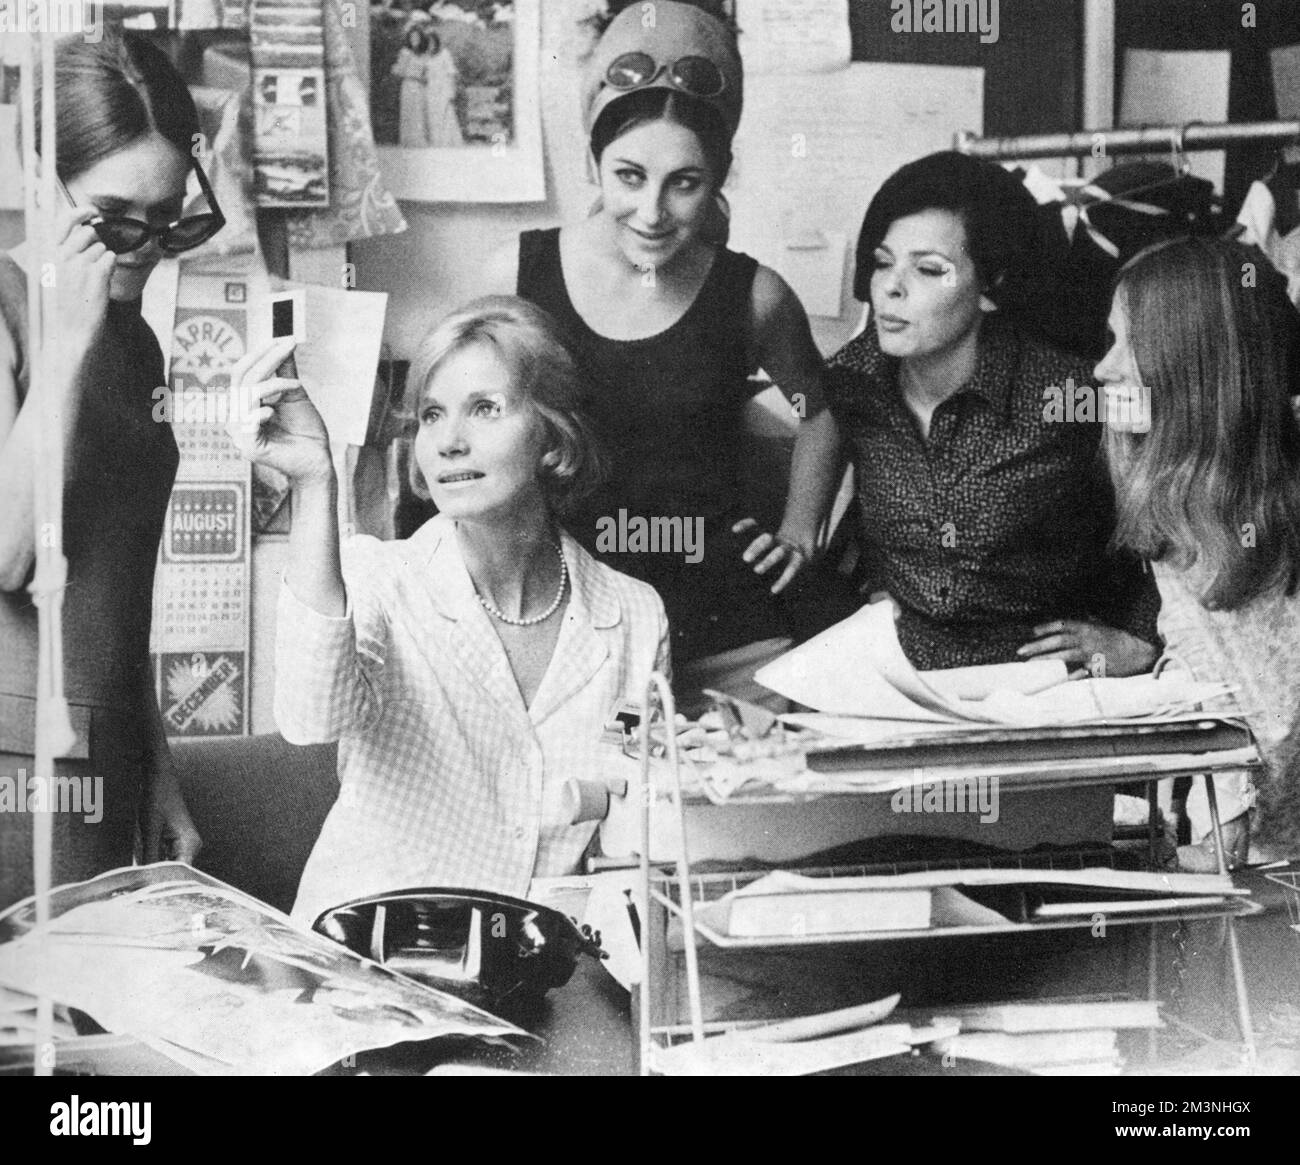 Evan Marie Saint (born 1924), American actress best known for starring in 'On the Waterfront' and 'North by North-West' pictured visiting the fashion department of the London Life magazine offices to pick up pointers for her role as a fashion editor in the film 'Grand Prix'.  With in this picture (left to right) are fashion writers, Sarah Drummond, Norma Moriceau, Gill Evans and Margaret Dreyfus.     Date: 1966 Stock Photo